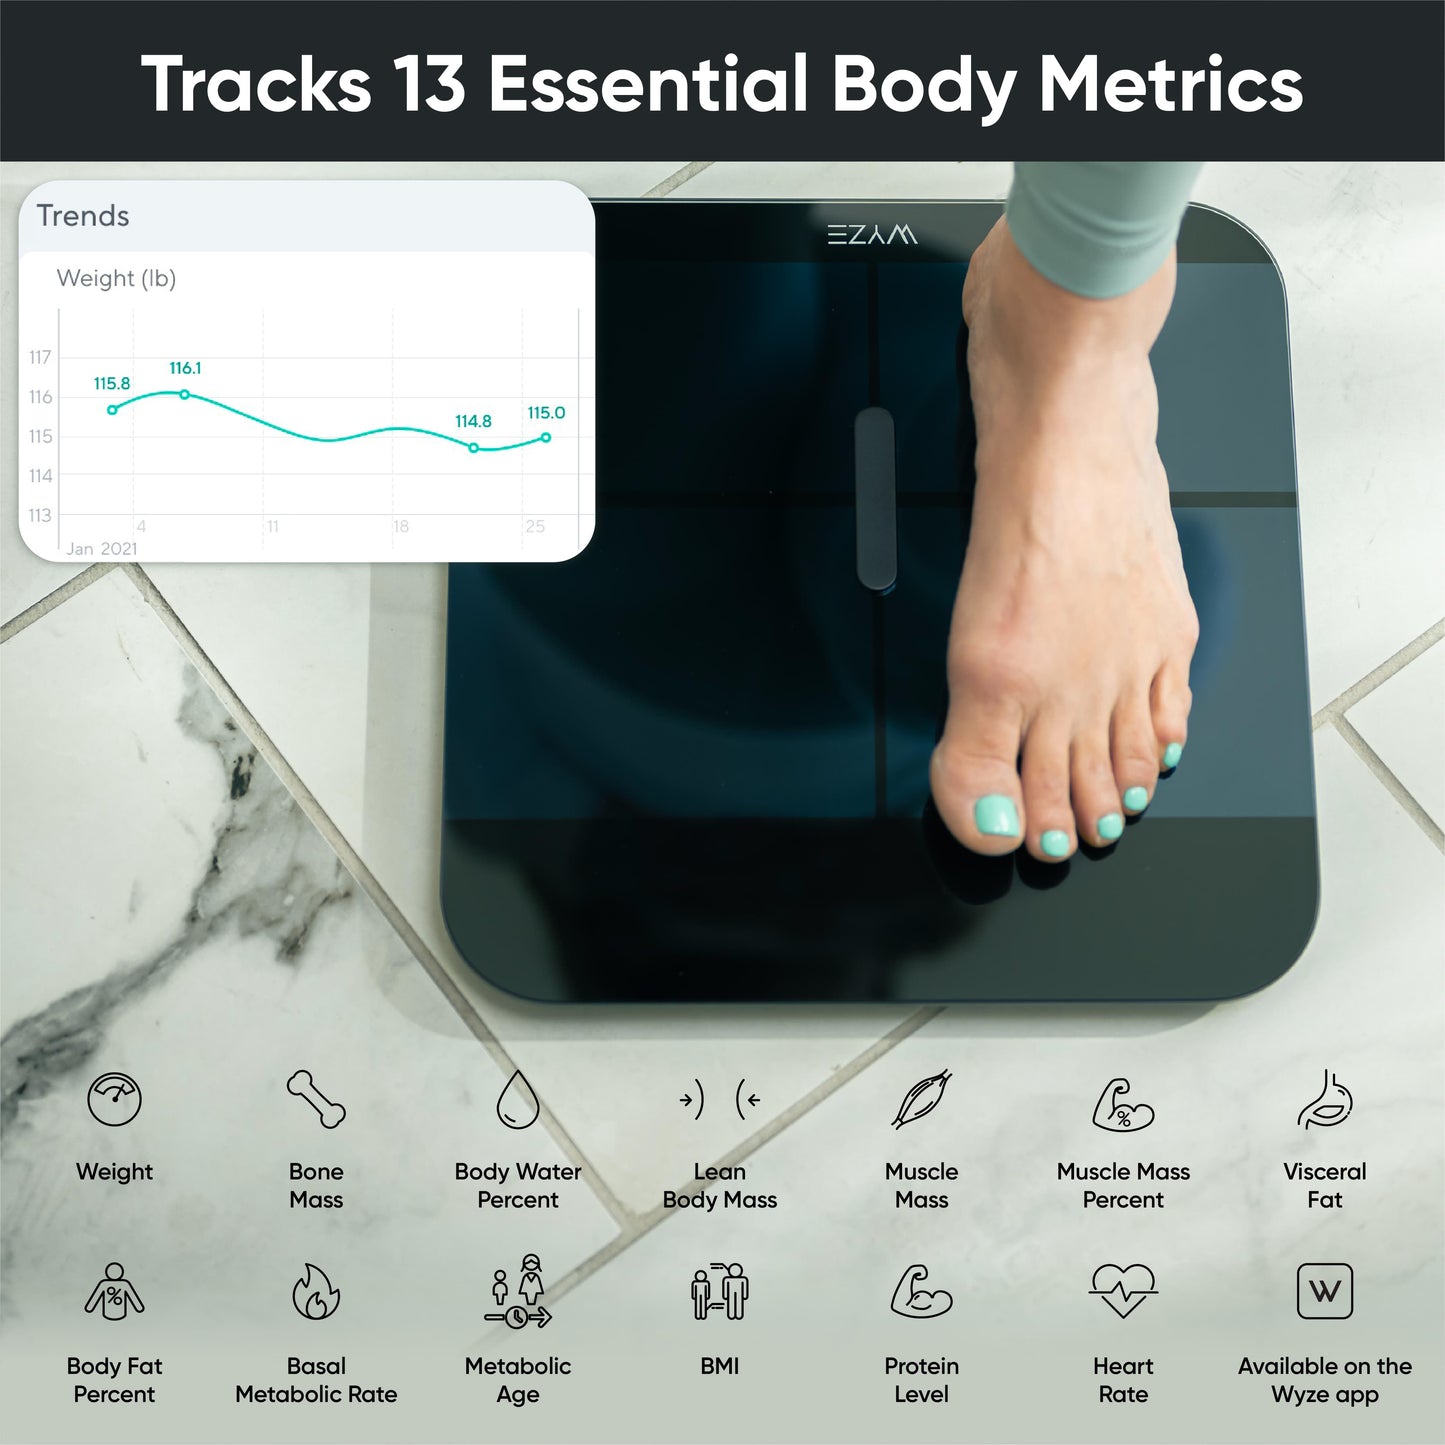 Foot on scale, text overlays says "Track 13 essential body metrics, weight, bone mass, body water %, lean body mass, muscle mass percent, visceral fat, body fat %, basal metabolic rate, metabolic age, BMI, protein level, heart rate."